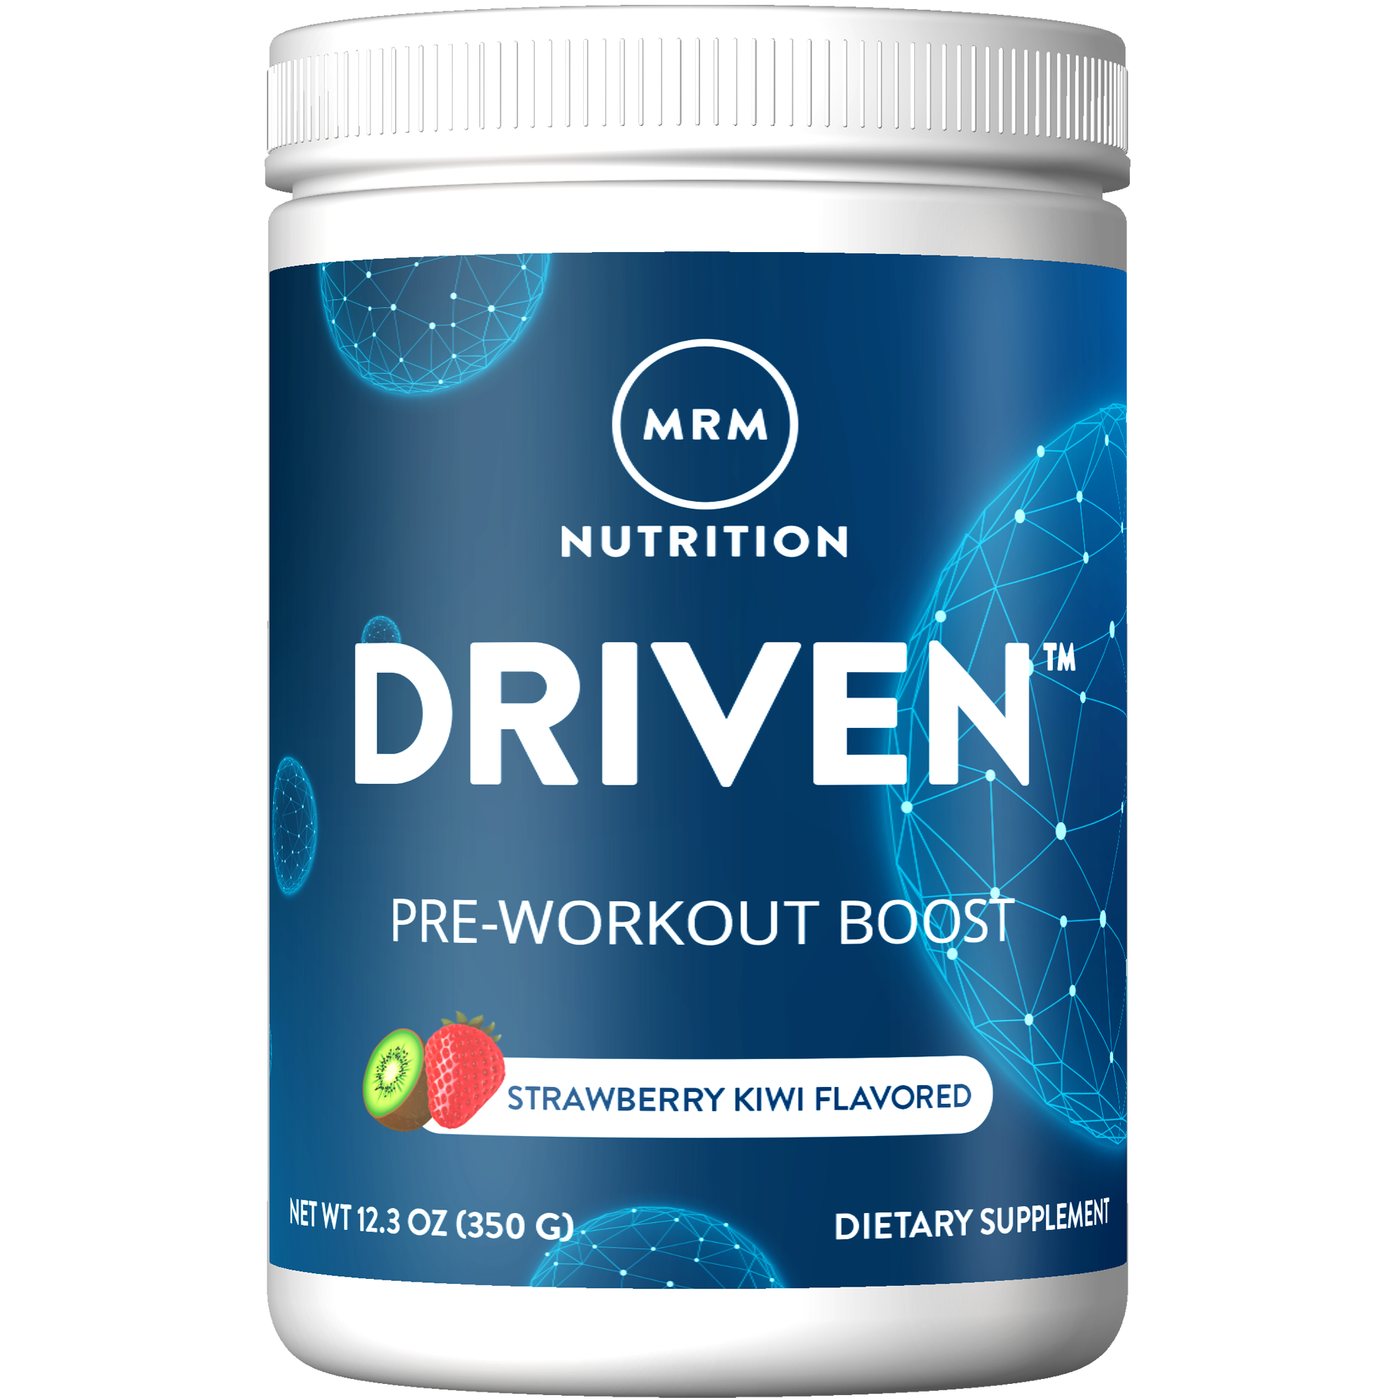 Driven Pre-workout Strwbr/Kiwi 350g Curated Wellness